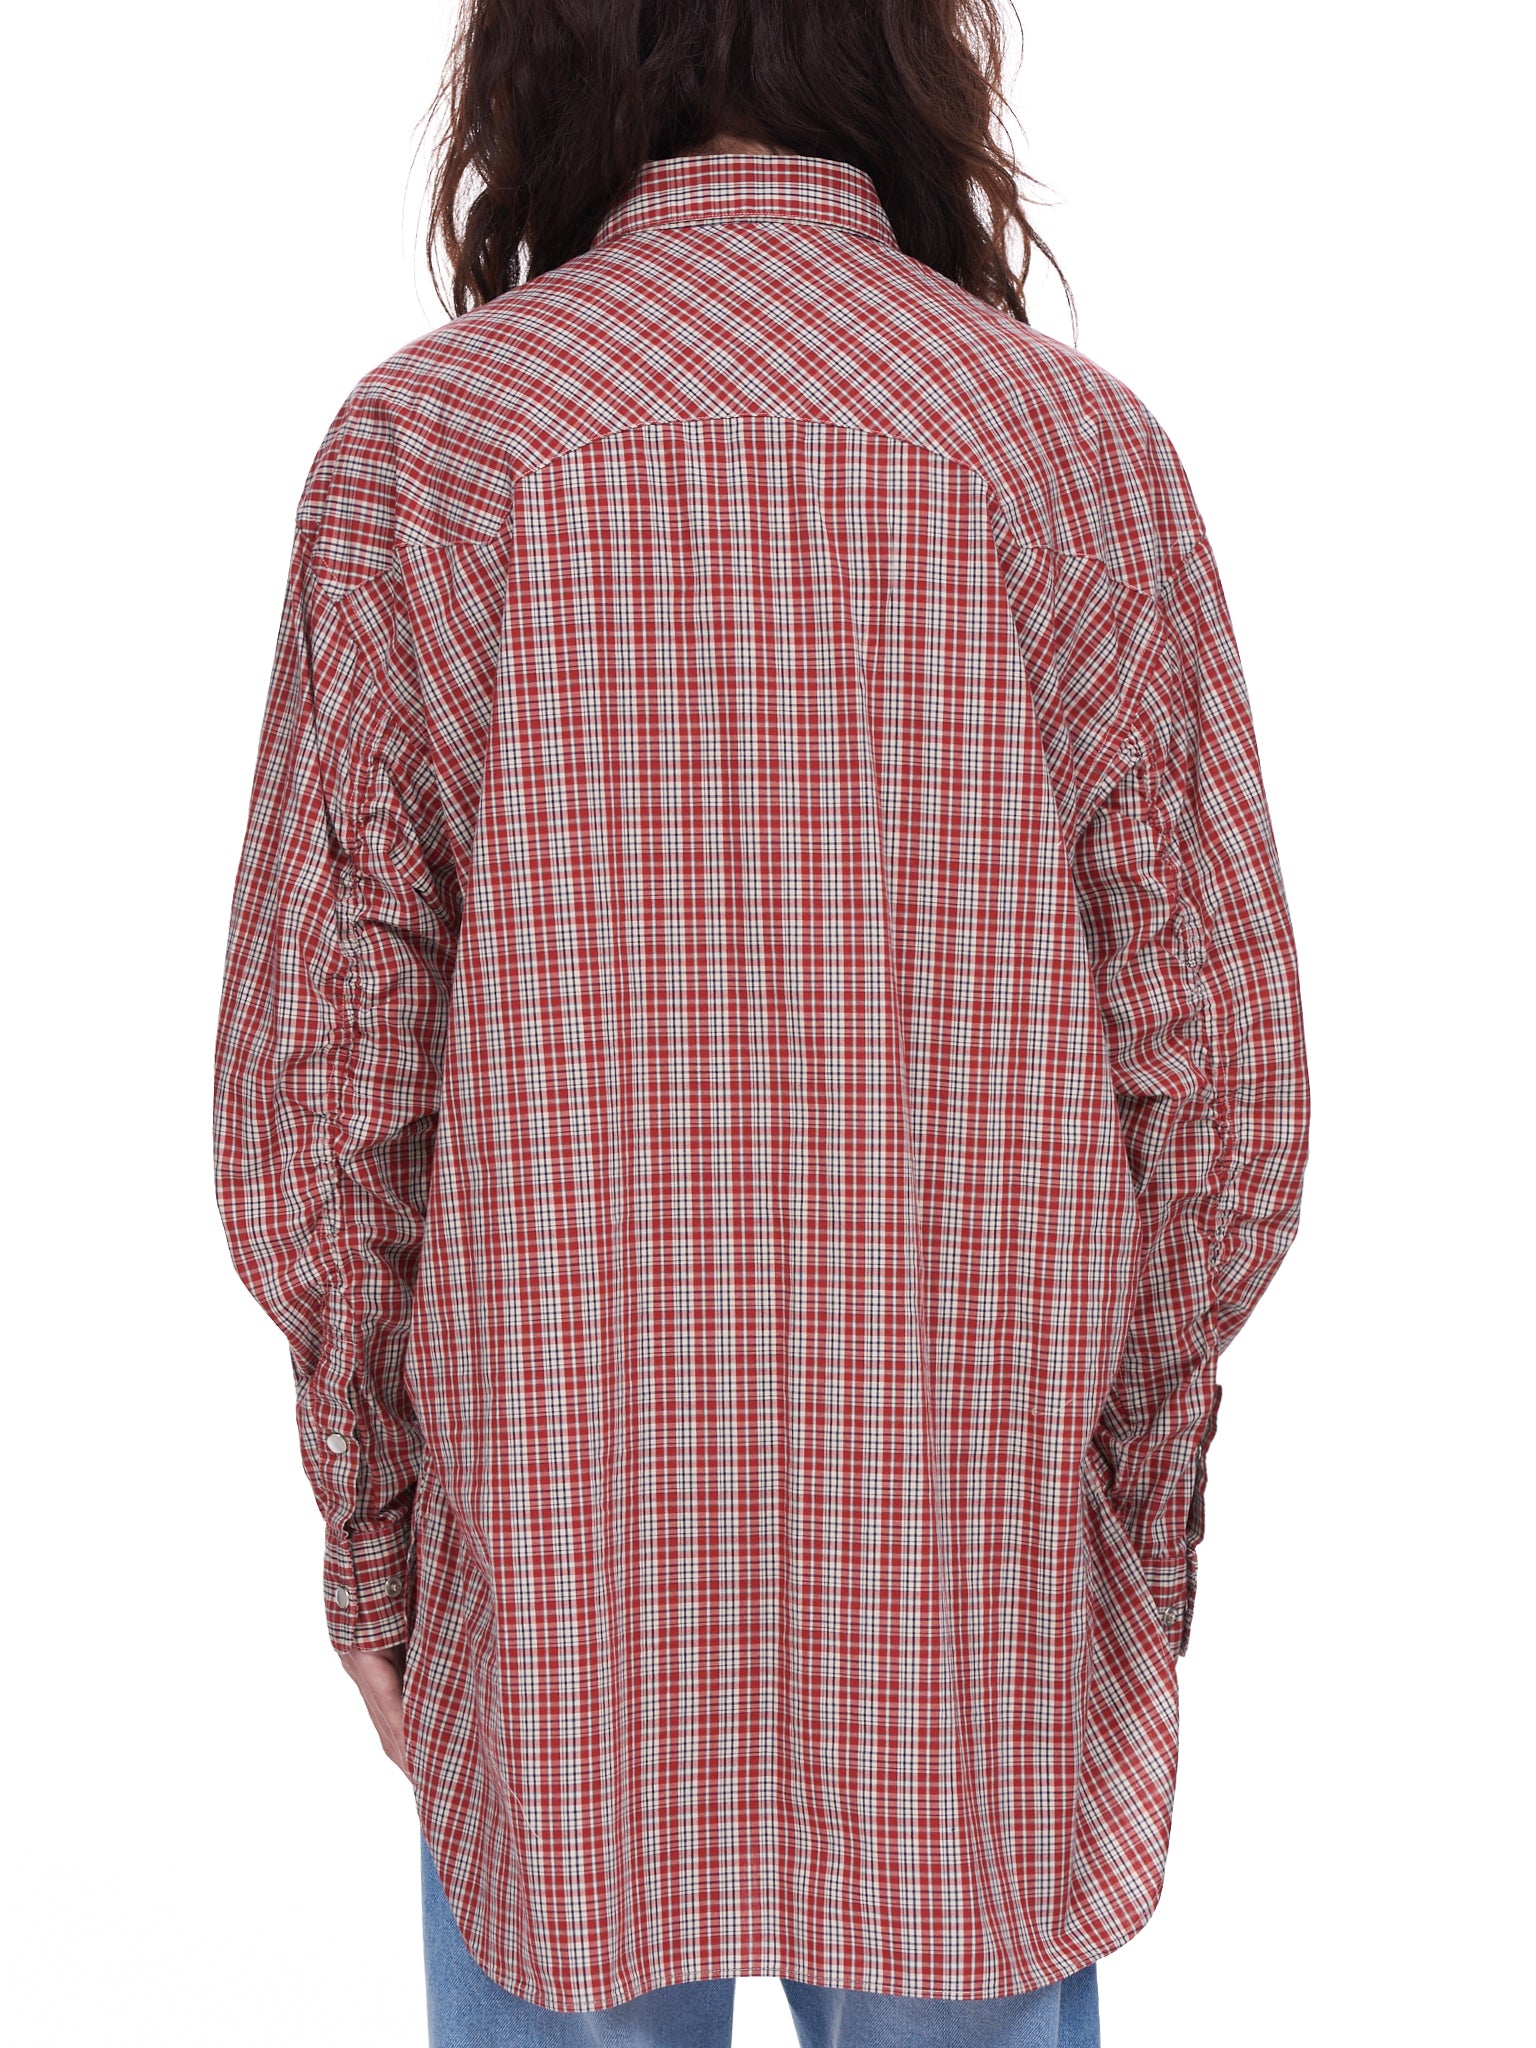 Undercover Plaid Top | H. Lorenzo - back